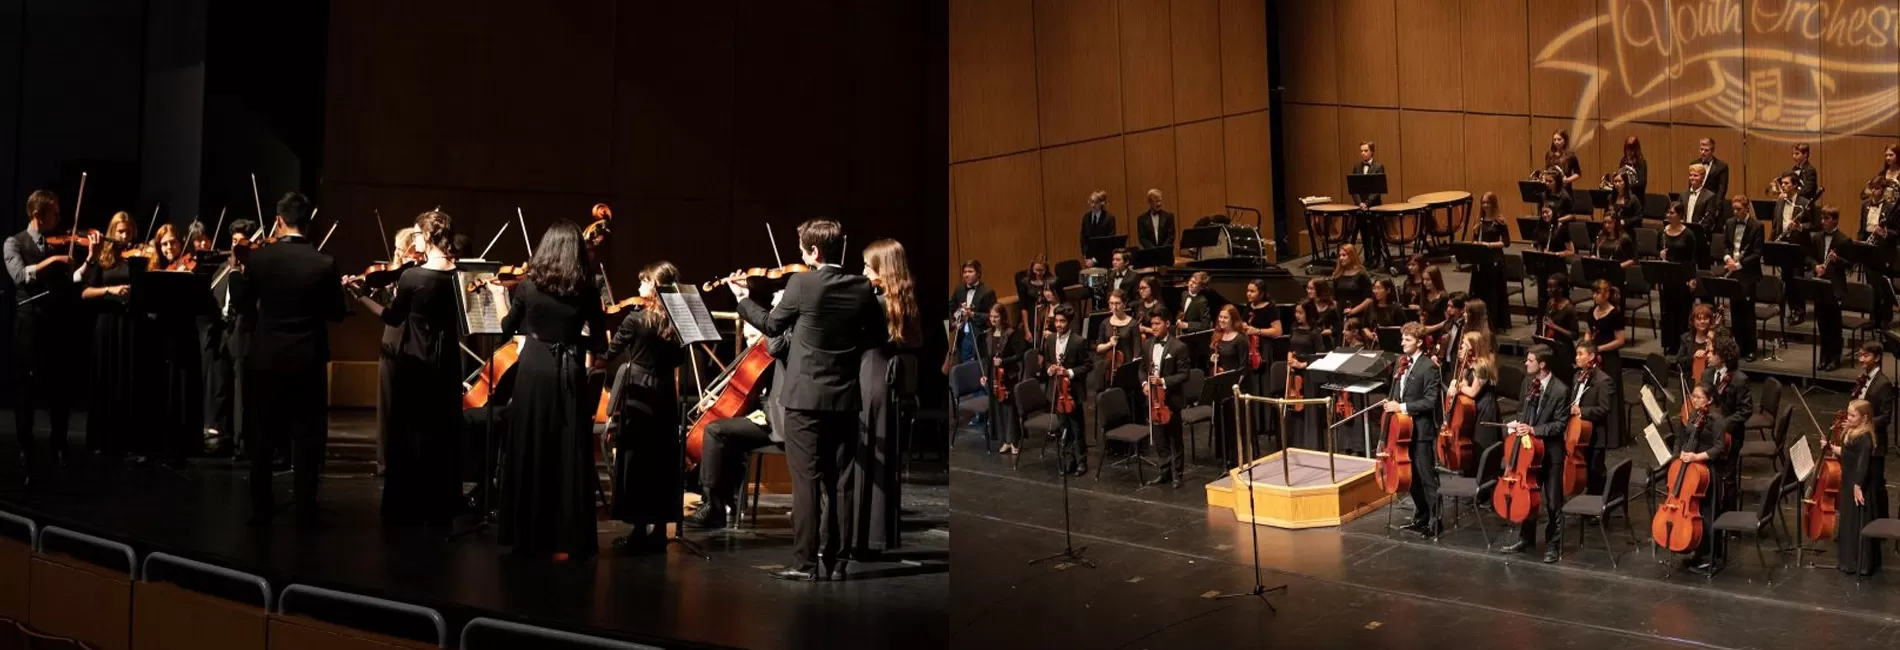 Conejo Valley Youth Orchestra's Winter Gala Concert